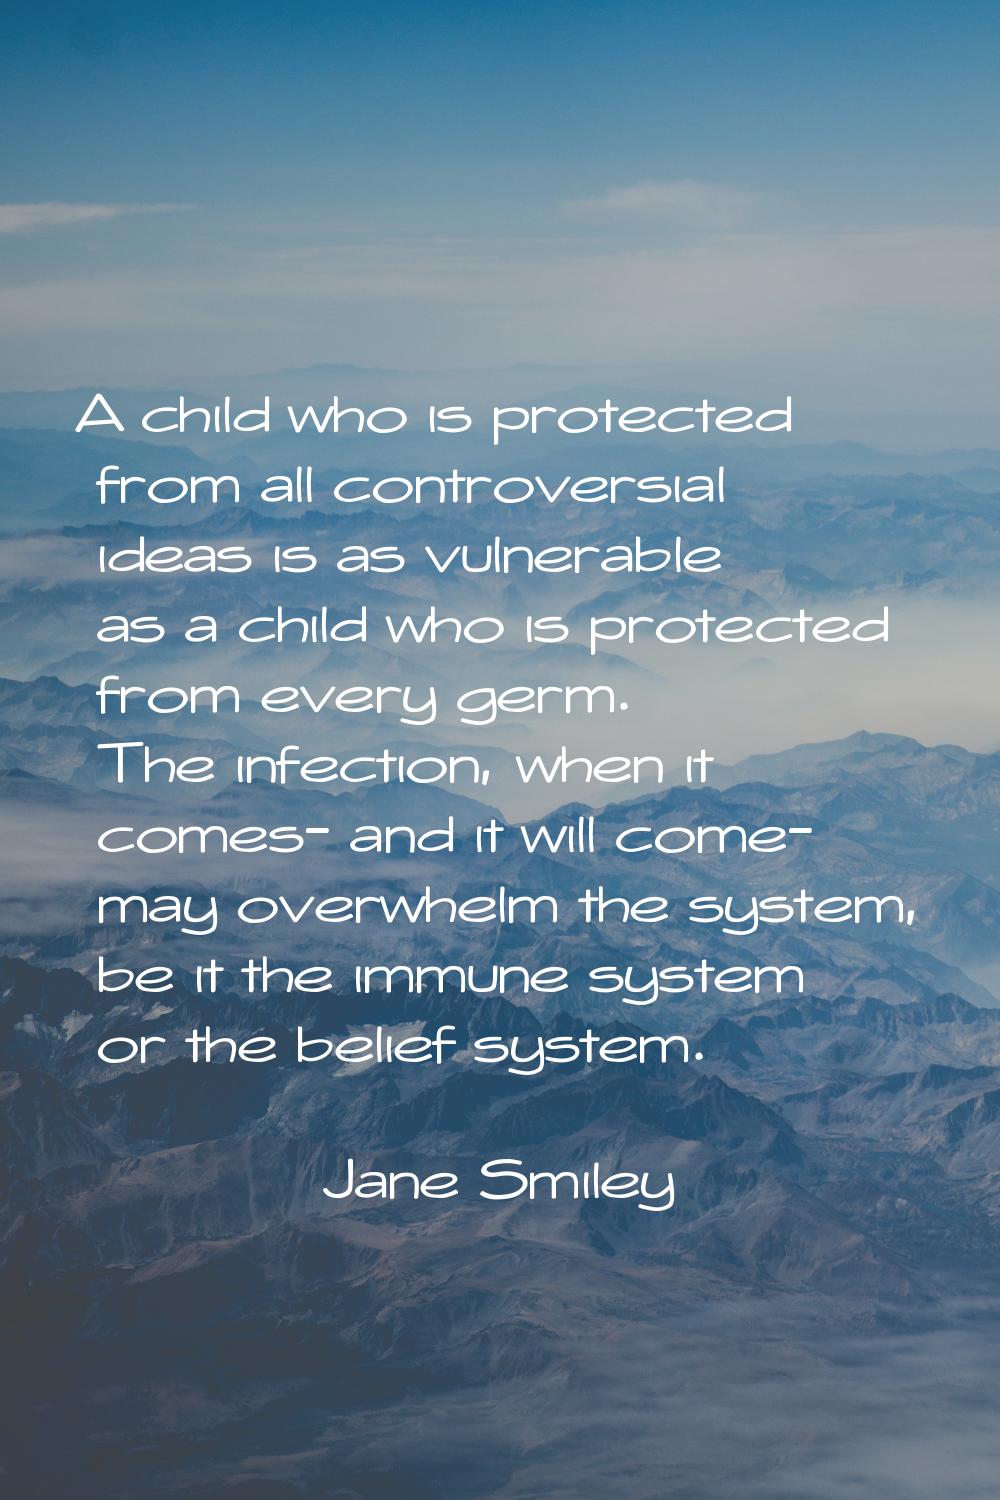 A child who is protected from all controversial ideas is as vulnerable as a child who is protected 